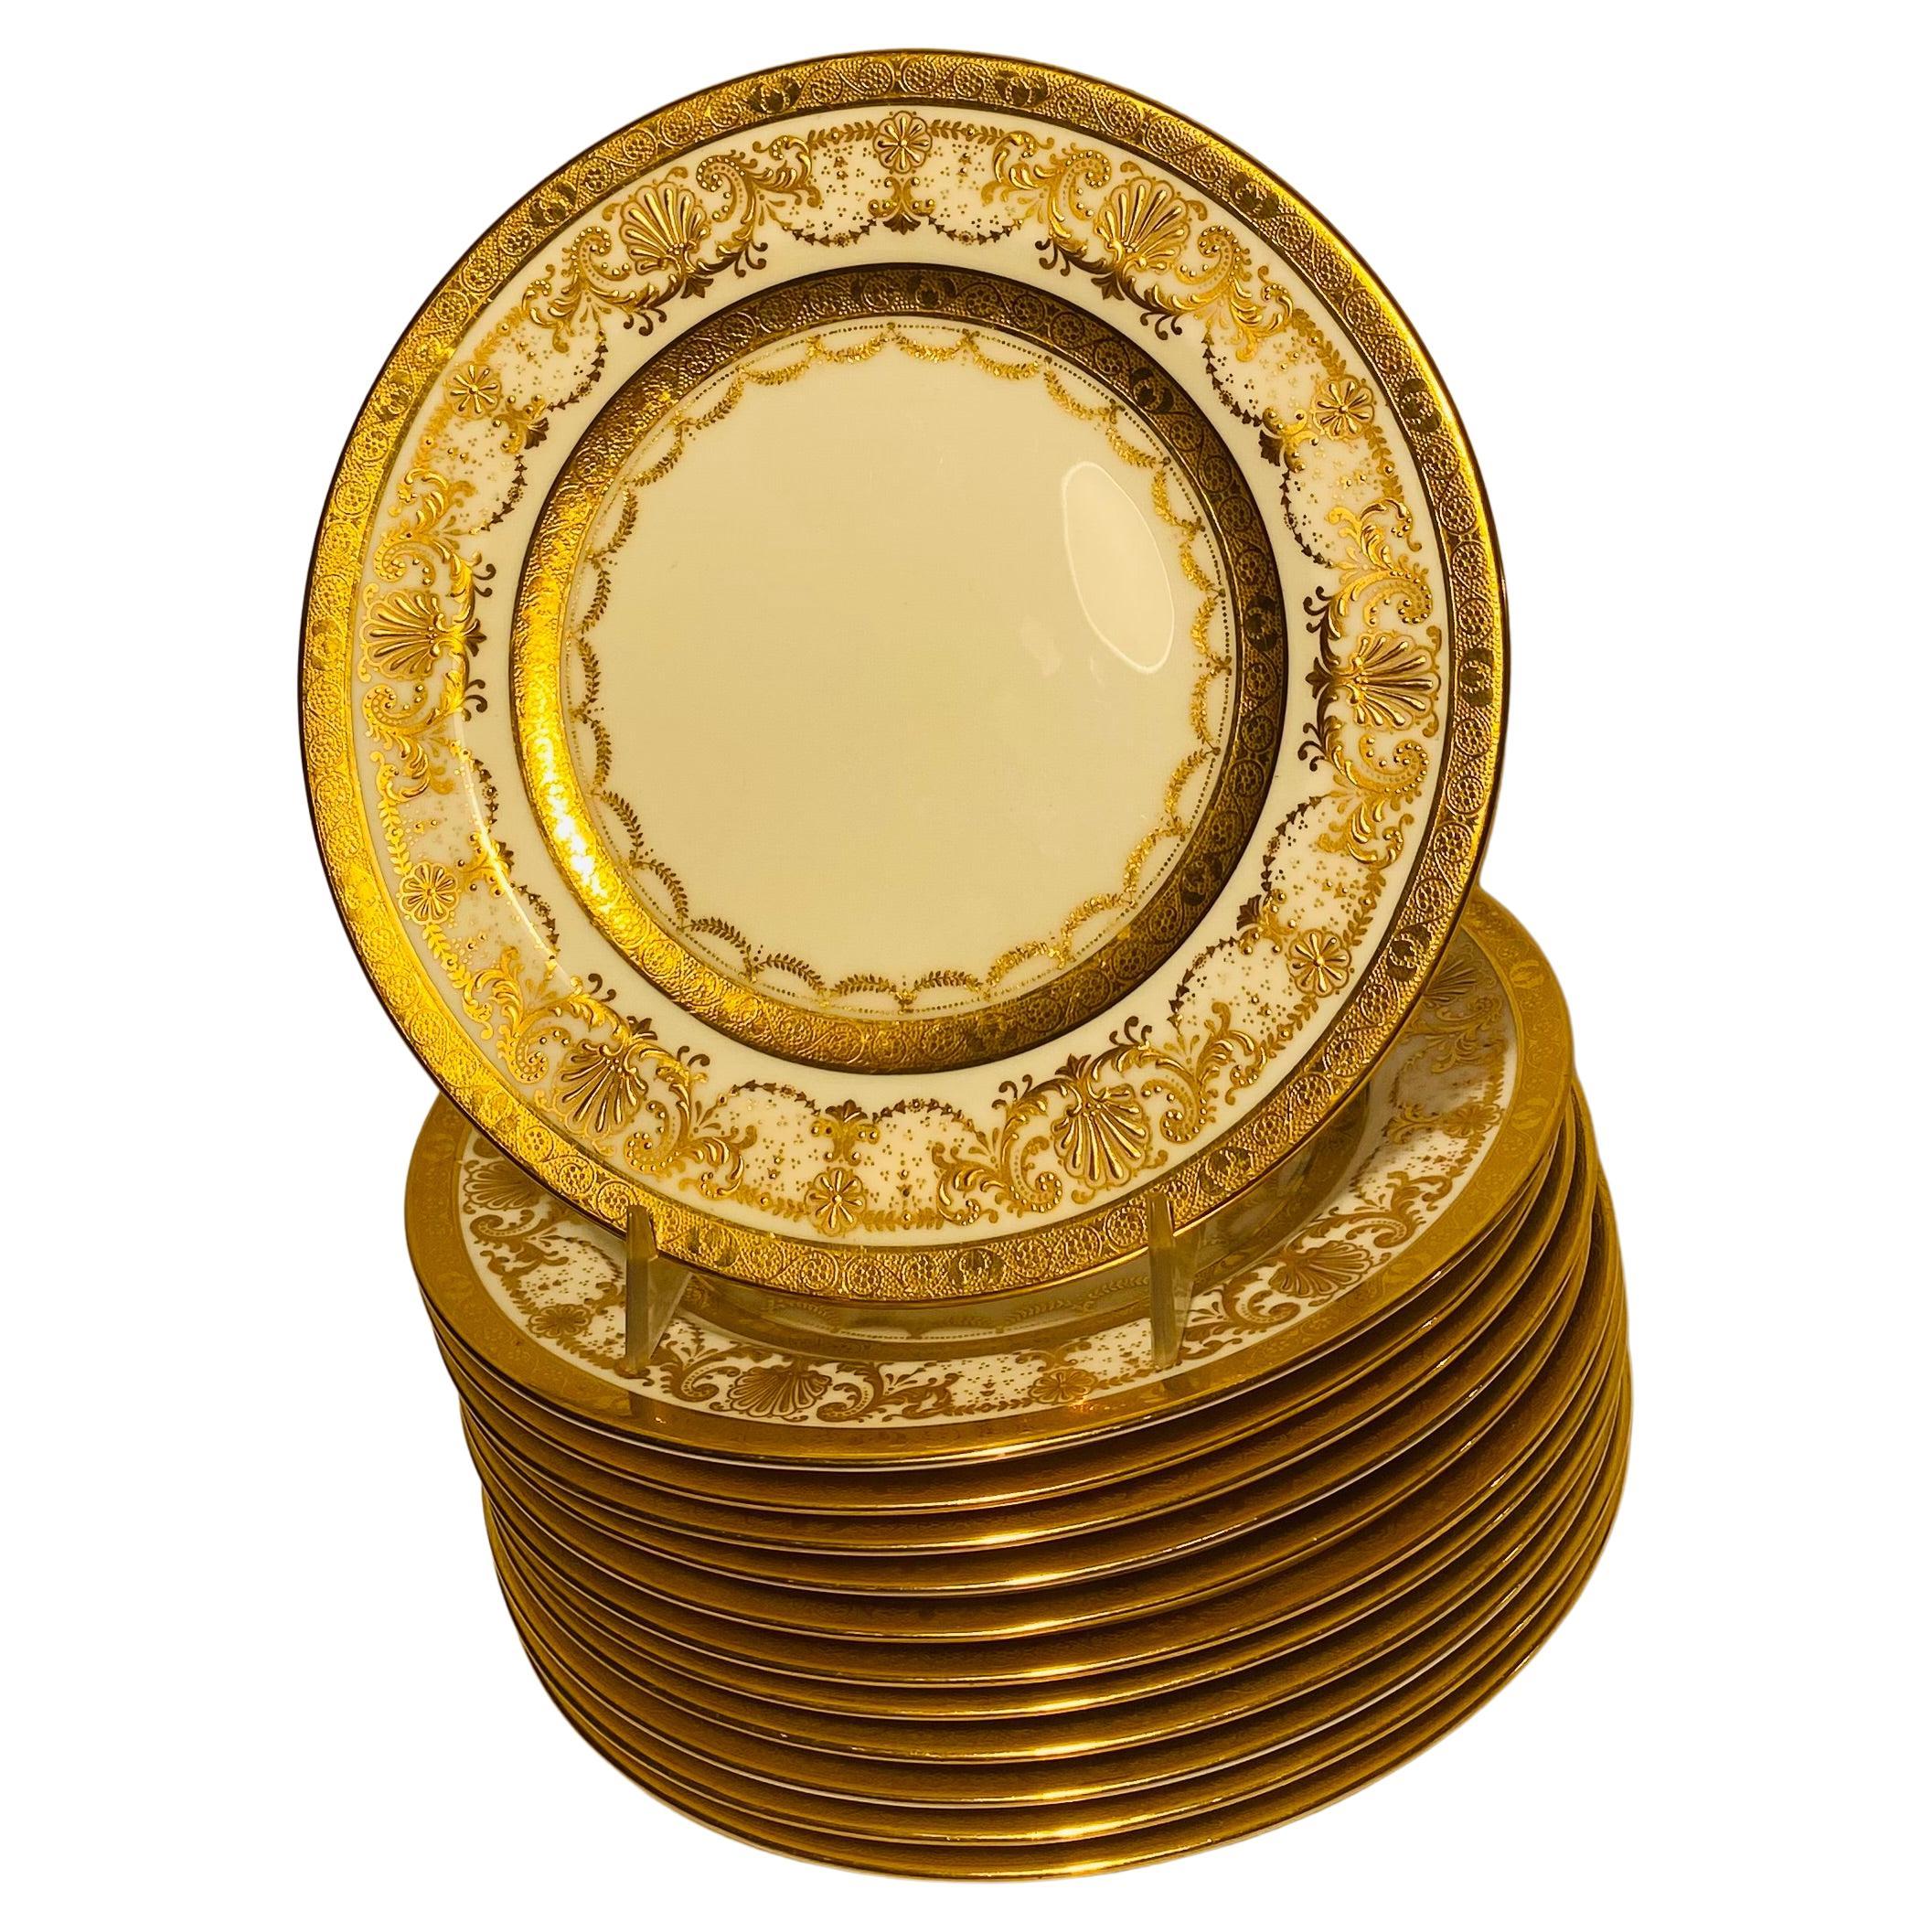 A classic and elegant set of 12 plates made by the storied Gilded Age firm of Cauldon England. This versatile size features raised and hand tooled gilding on their elaborate collars with a nice clear center for use. Perfect for mixing and matching